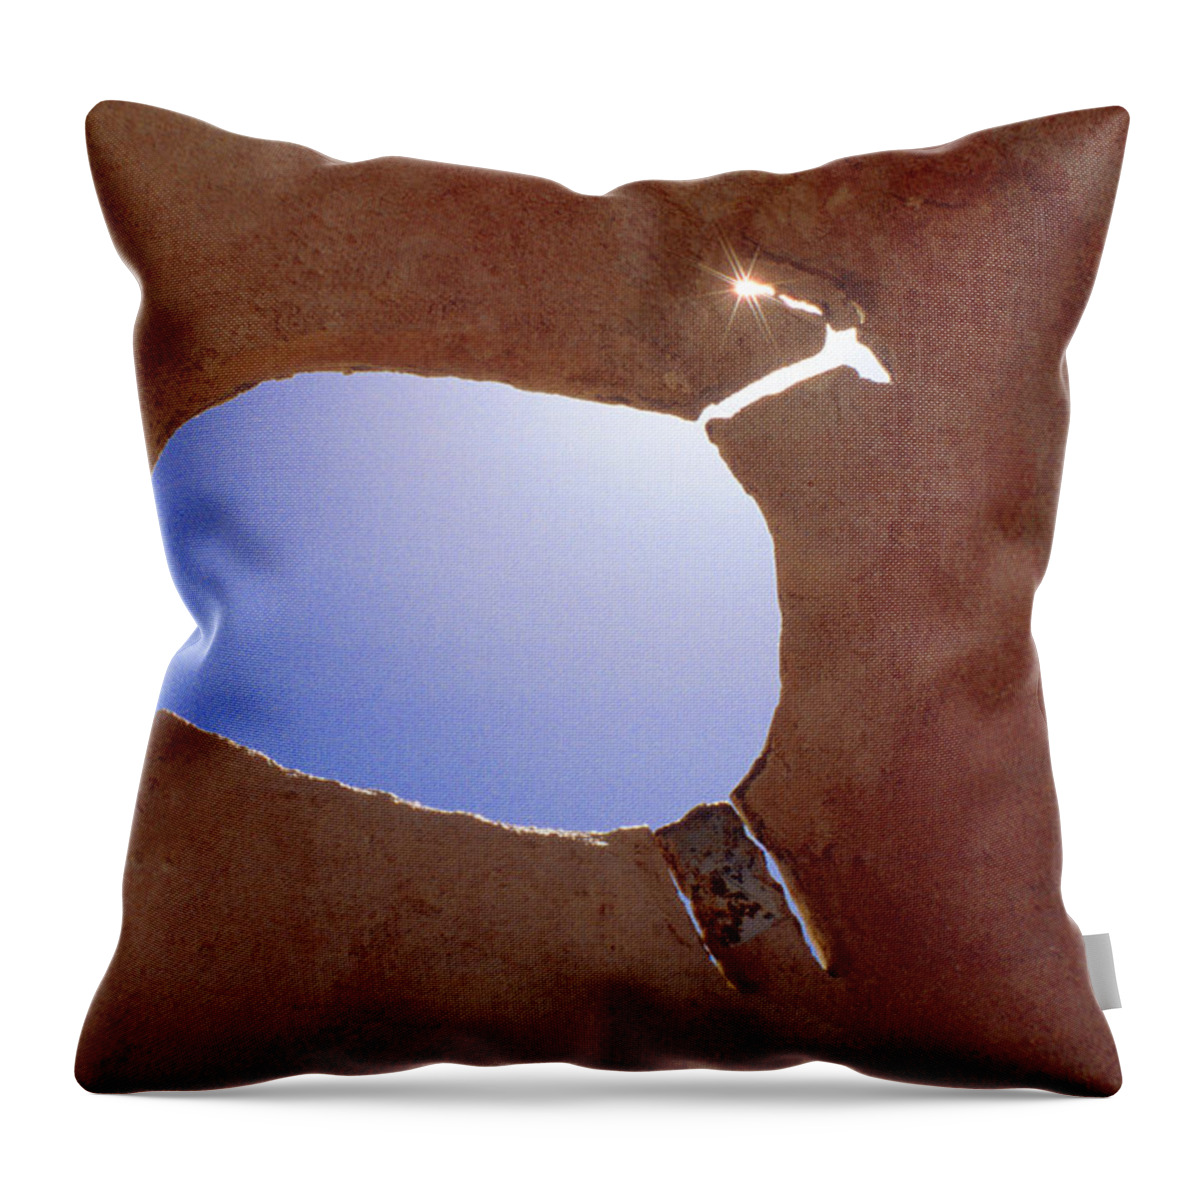 Pictograph Throw Pillow featuring the photograph Rock Art by Jerry McElroy